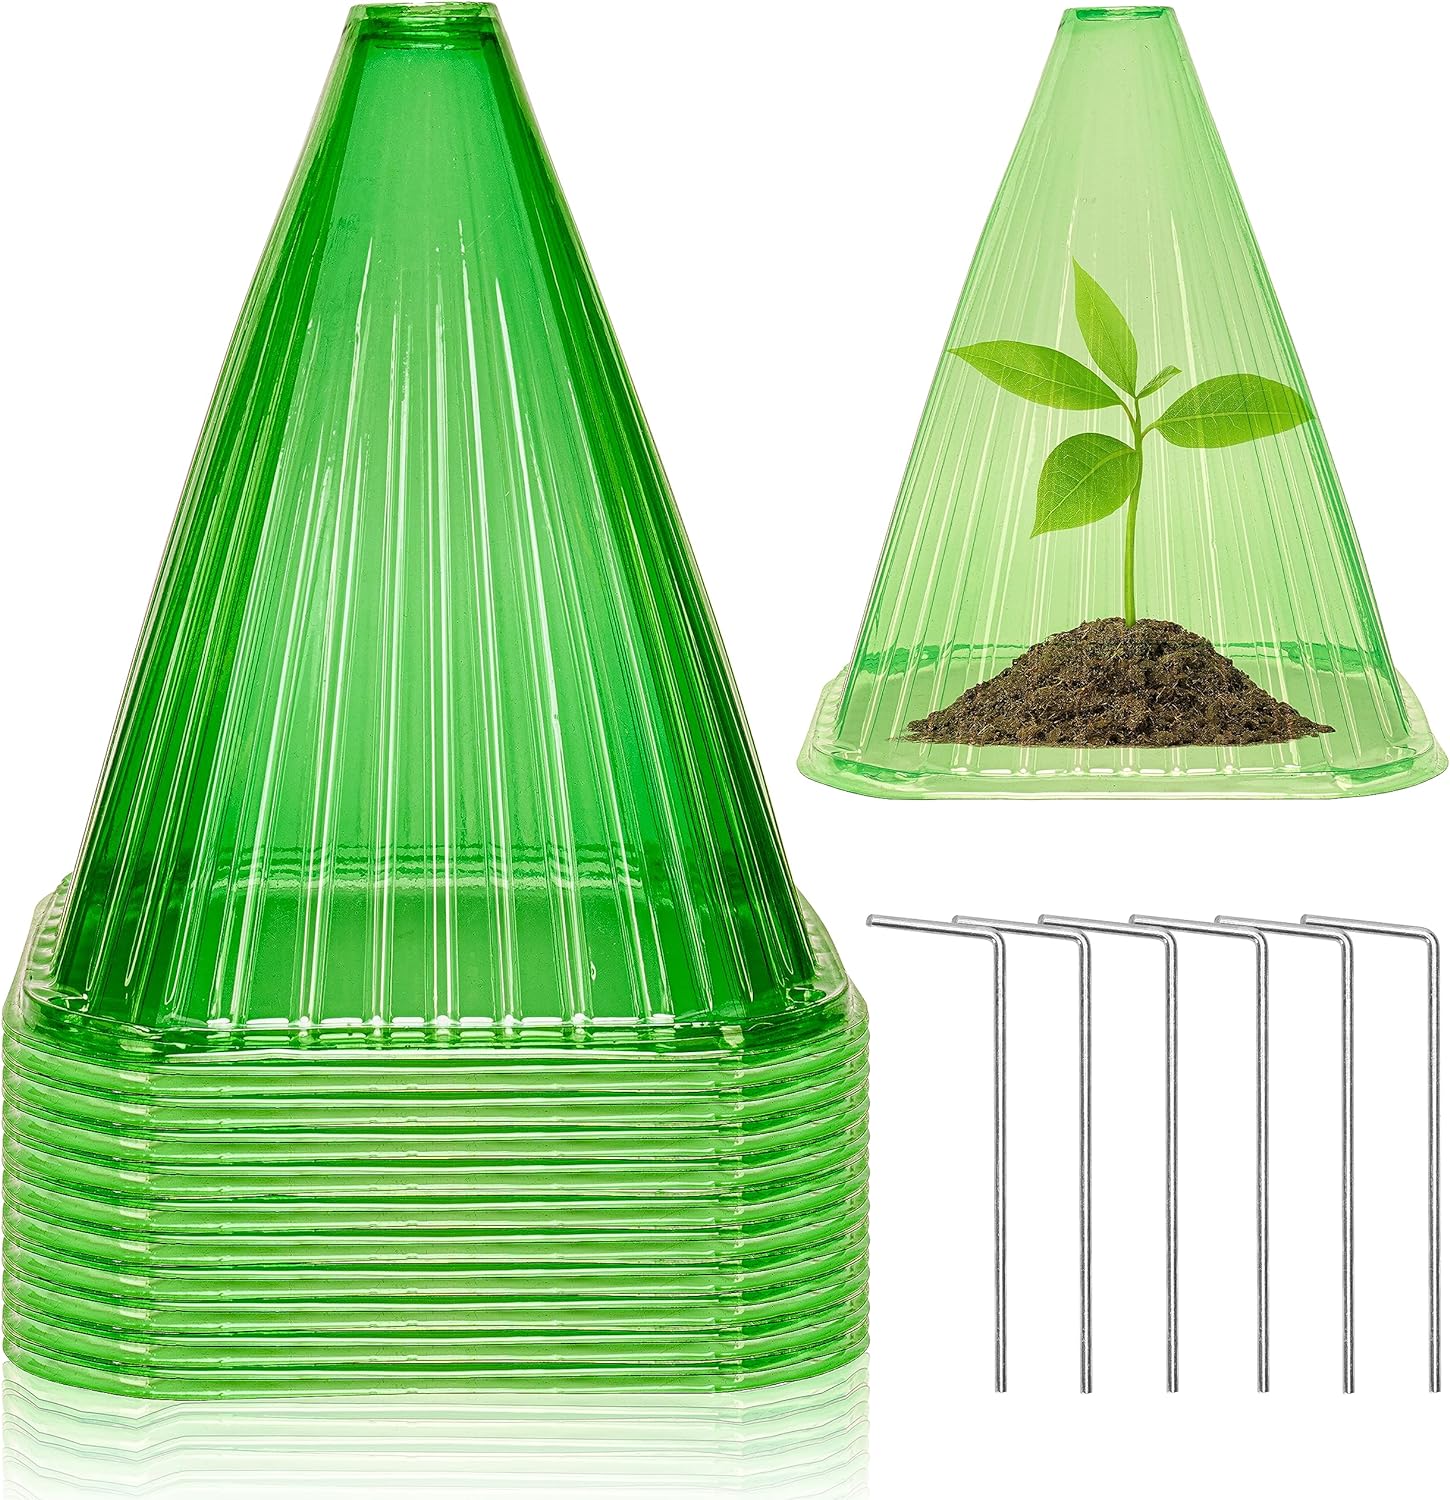 Garden  Cloches Plant Protection Transparent Green 15 PCS 30 Pieces of İron Hook - Plant Cover Reusable, Plant Bell Cover - Sun, Frost, Rain, Mud - Animals, Snails, Birds, Chickens, Insect Protectors